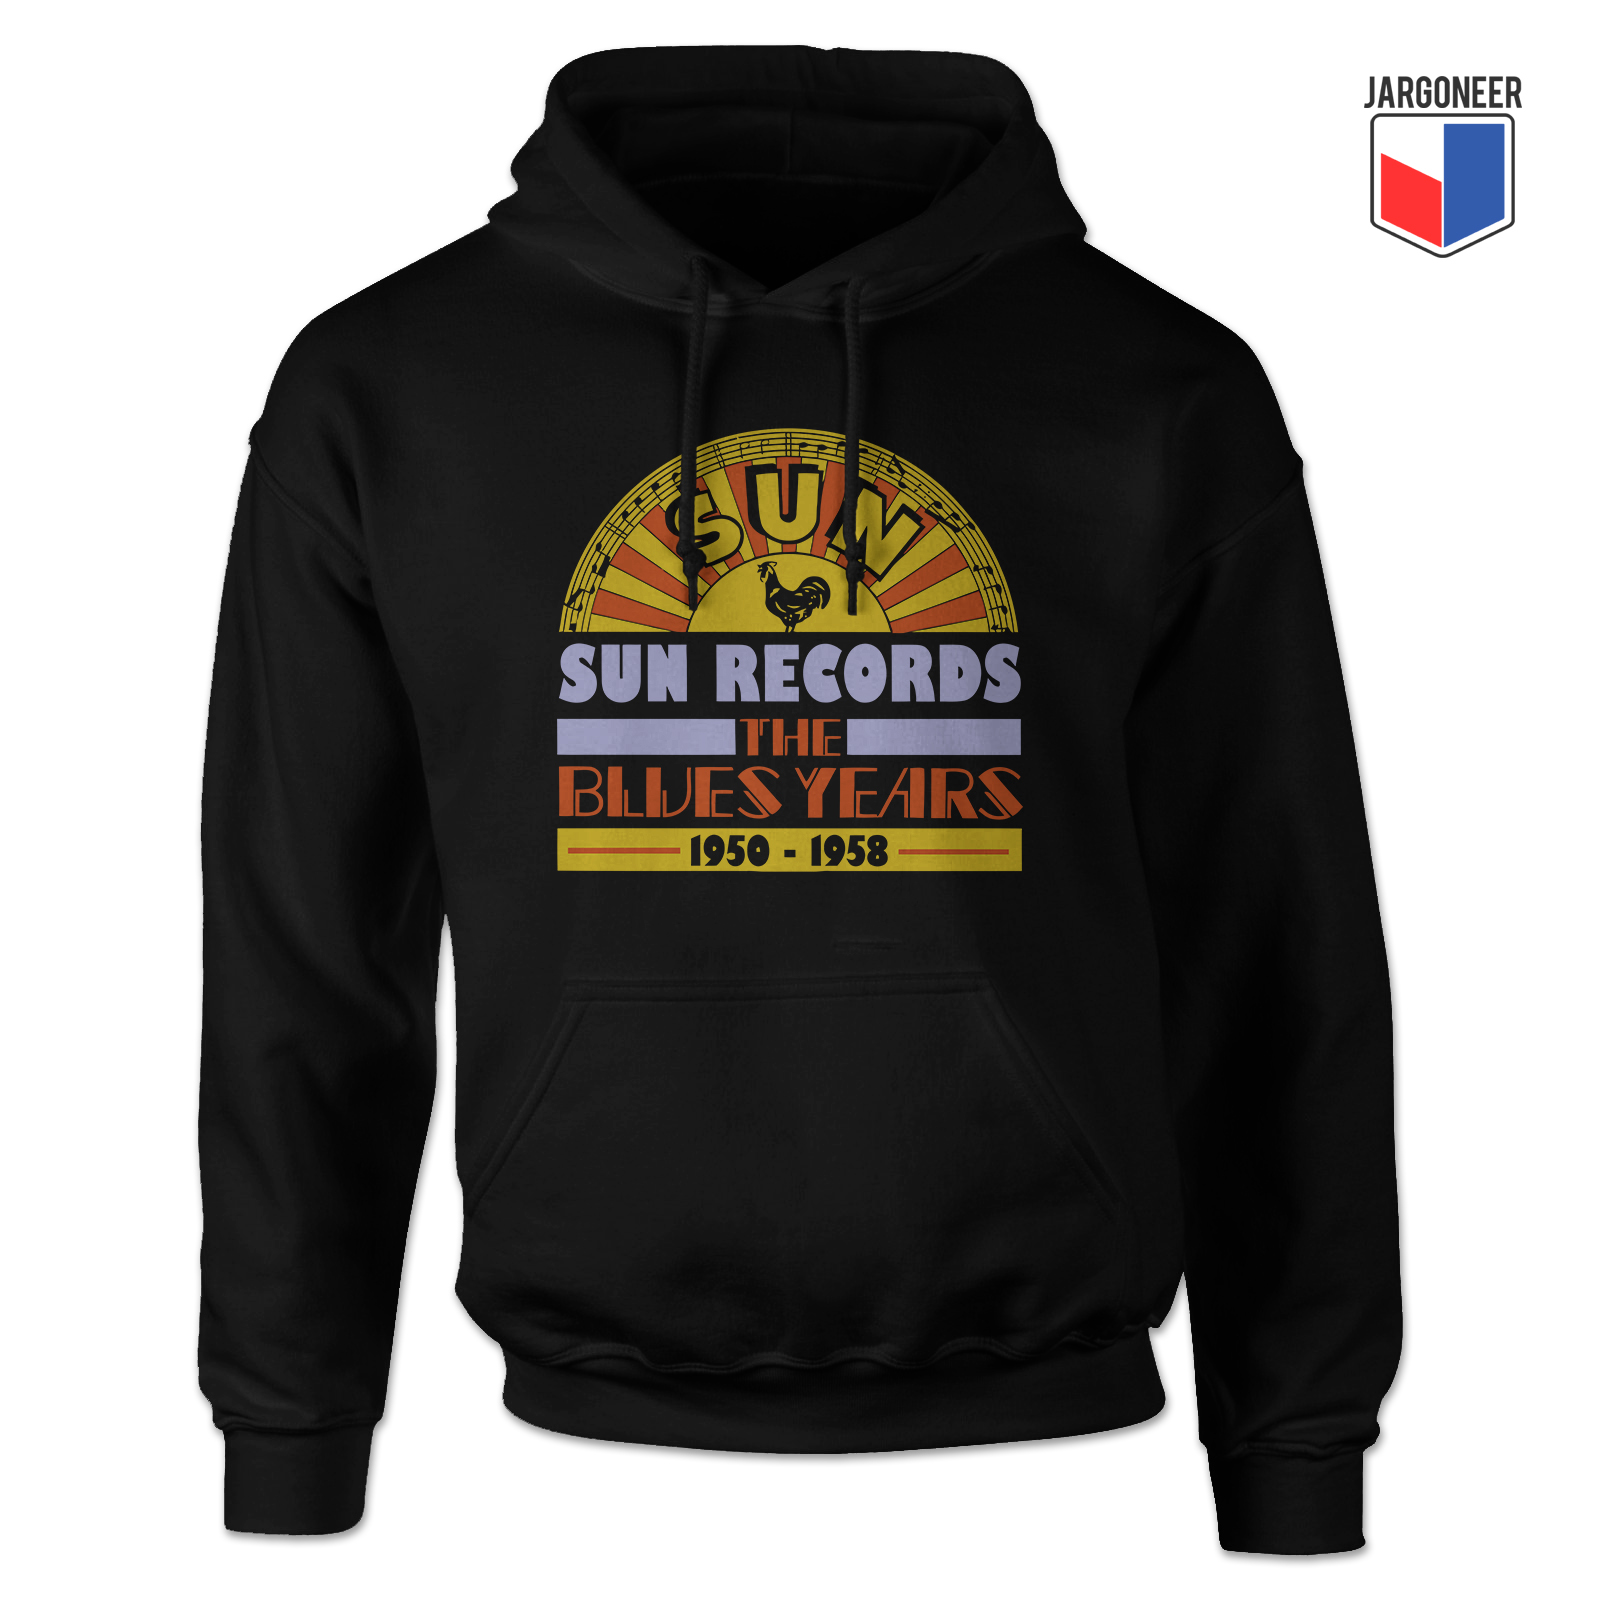 Sun Records The Blues Years Black Hoody - Shop Unique Graphic Cool Shirt Designs